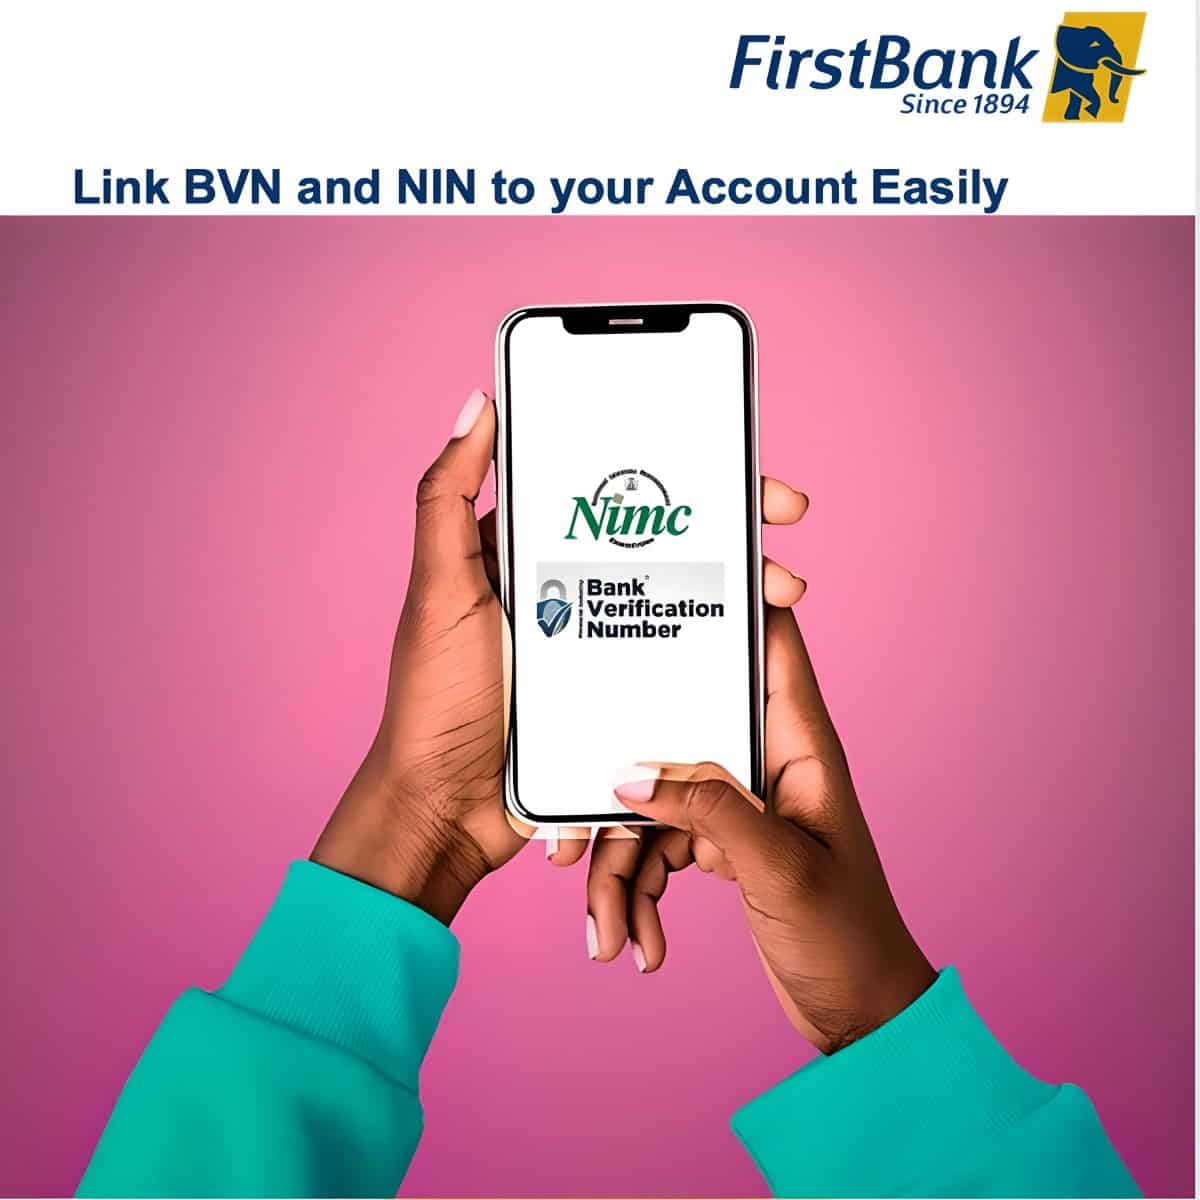 Link Your BVN and NIN to Your First Bank Account Online